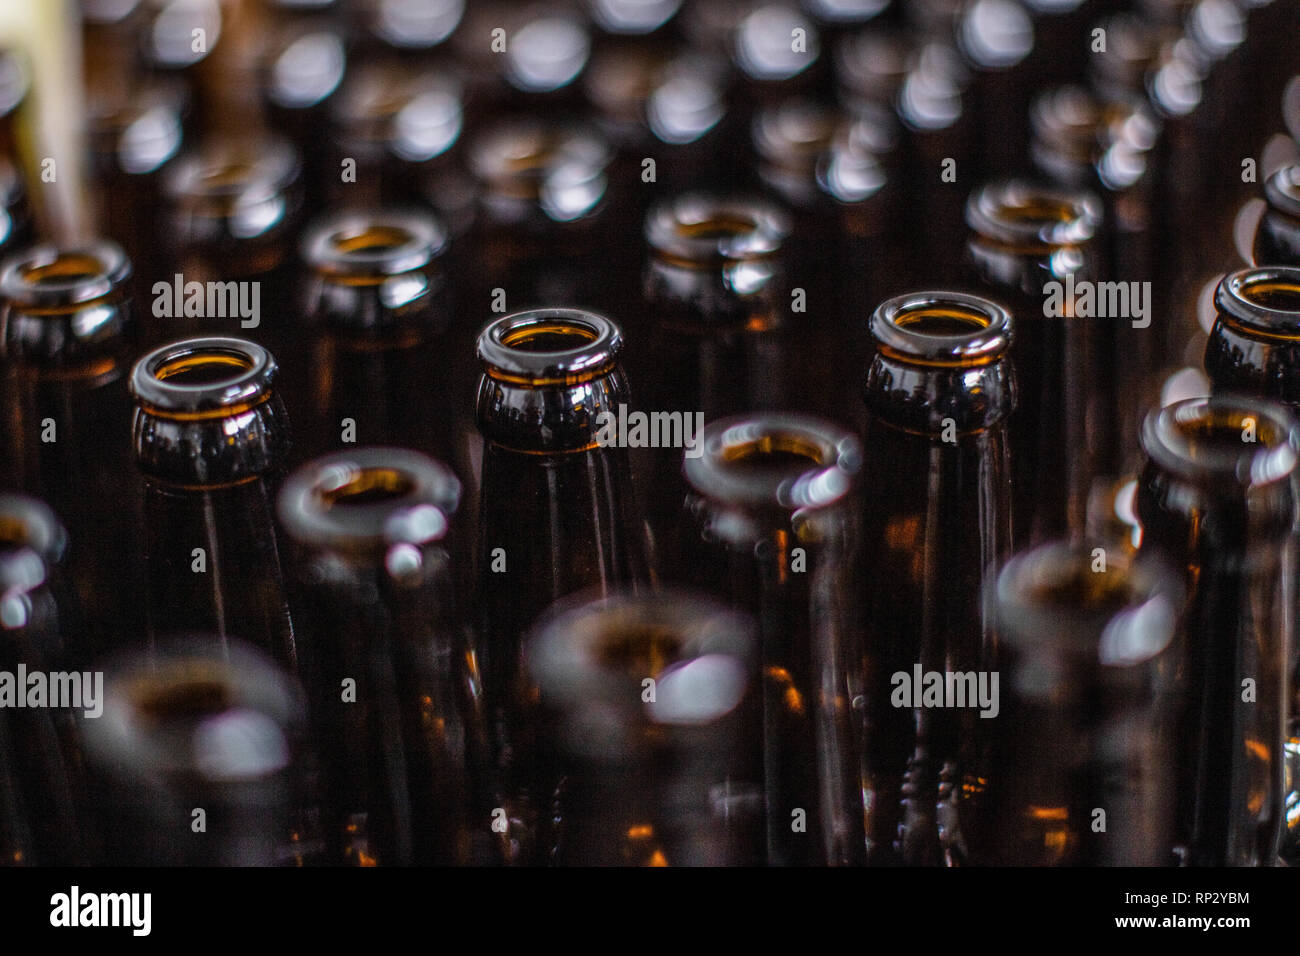 Taybeh, Palestine. Autonomous Areas. 06th Feb, 2019. 'Taybeh' beer bottles are prepared for bottling in the brewery near Ramallah. The family brewery 'Taybeh' was opened 25 years ago. (to dpa 'Palestinian woman brews beer according to German purity law' of 21.02.2019) Credit: Ilia Yefimovich/dpa/Alamy Live News Stock Photo